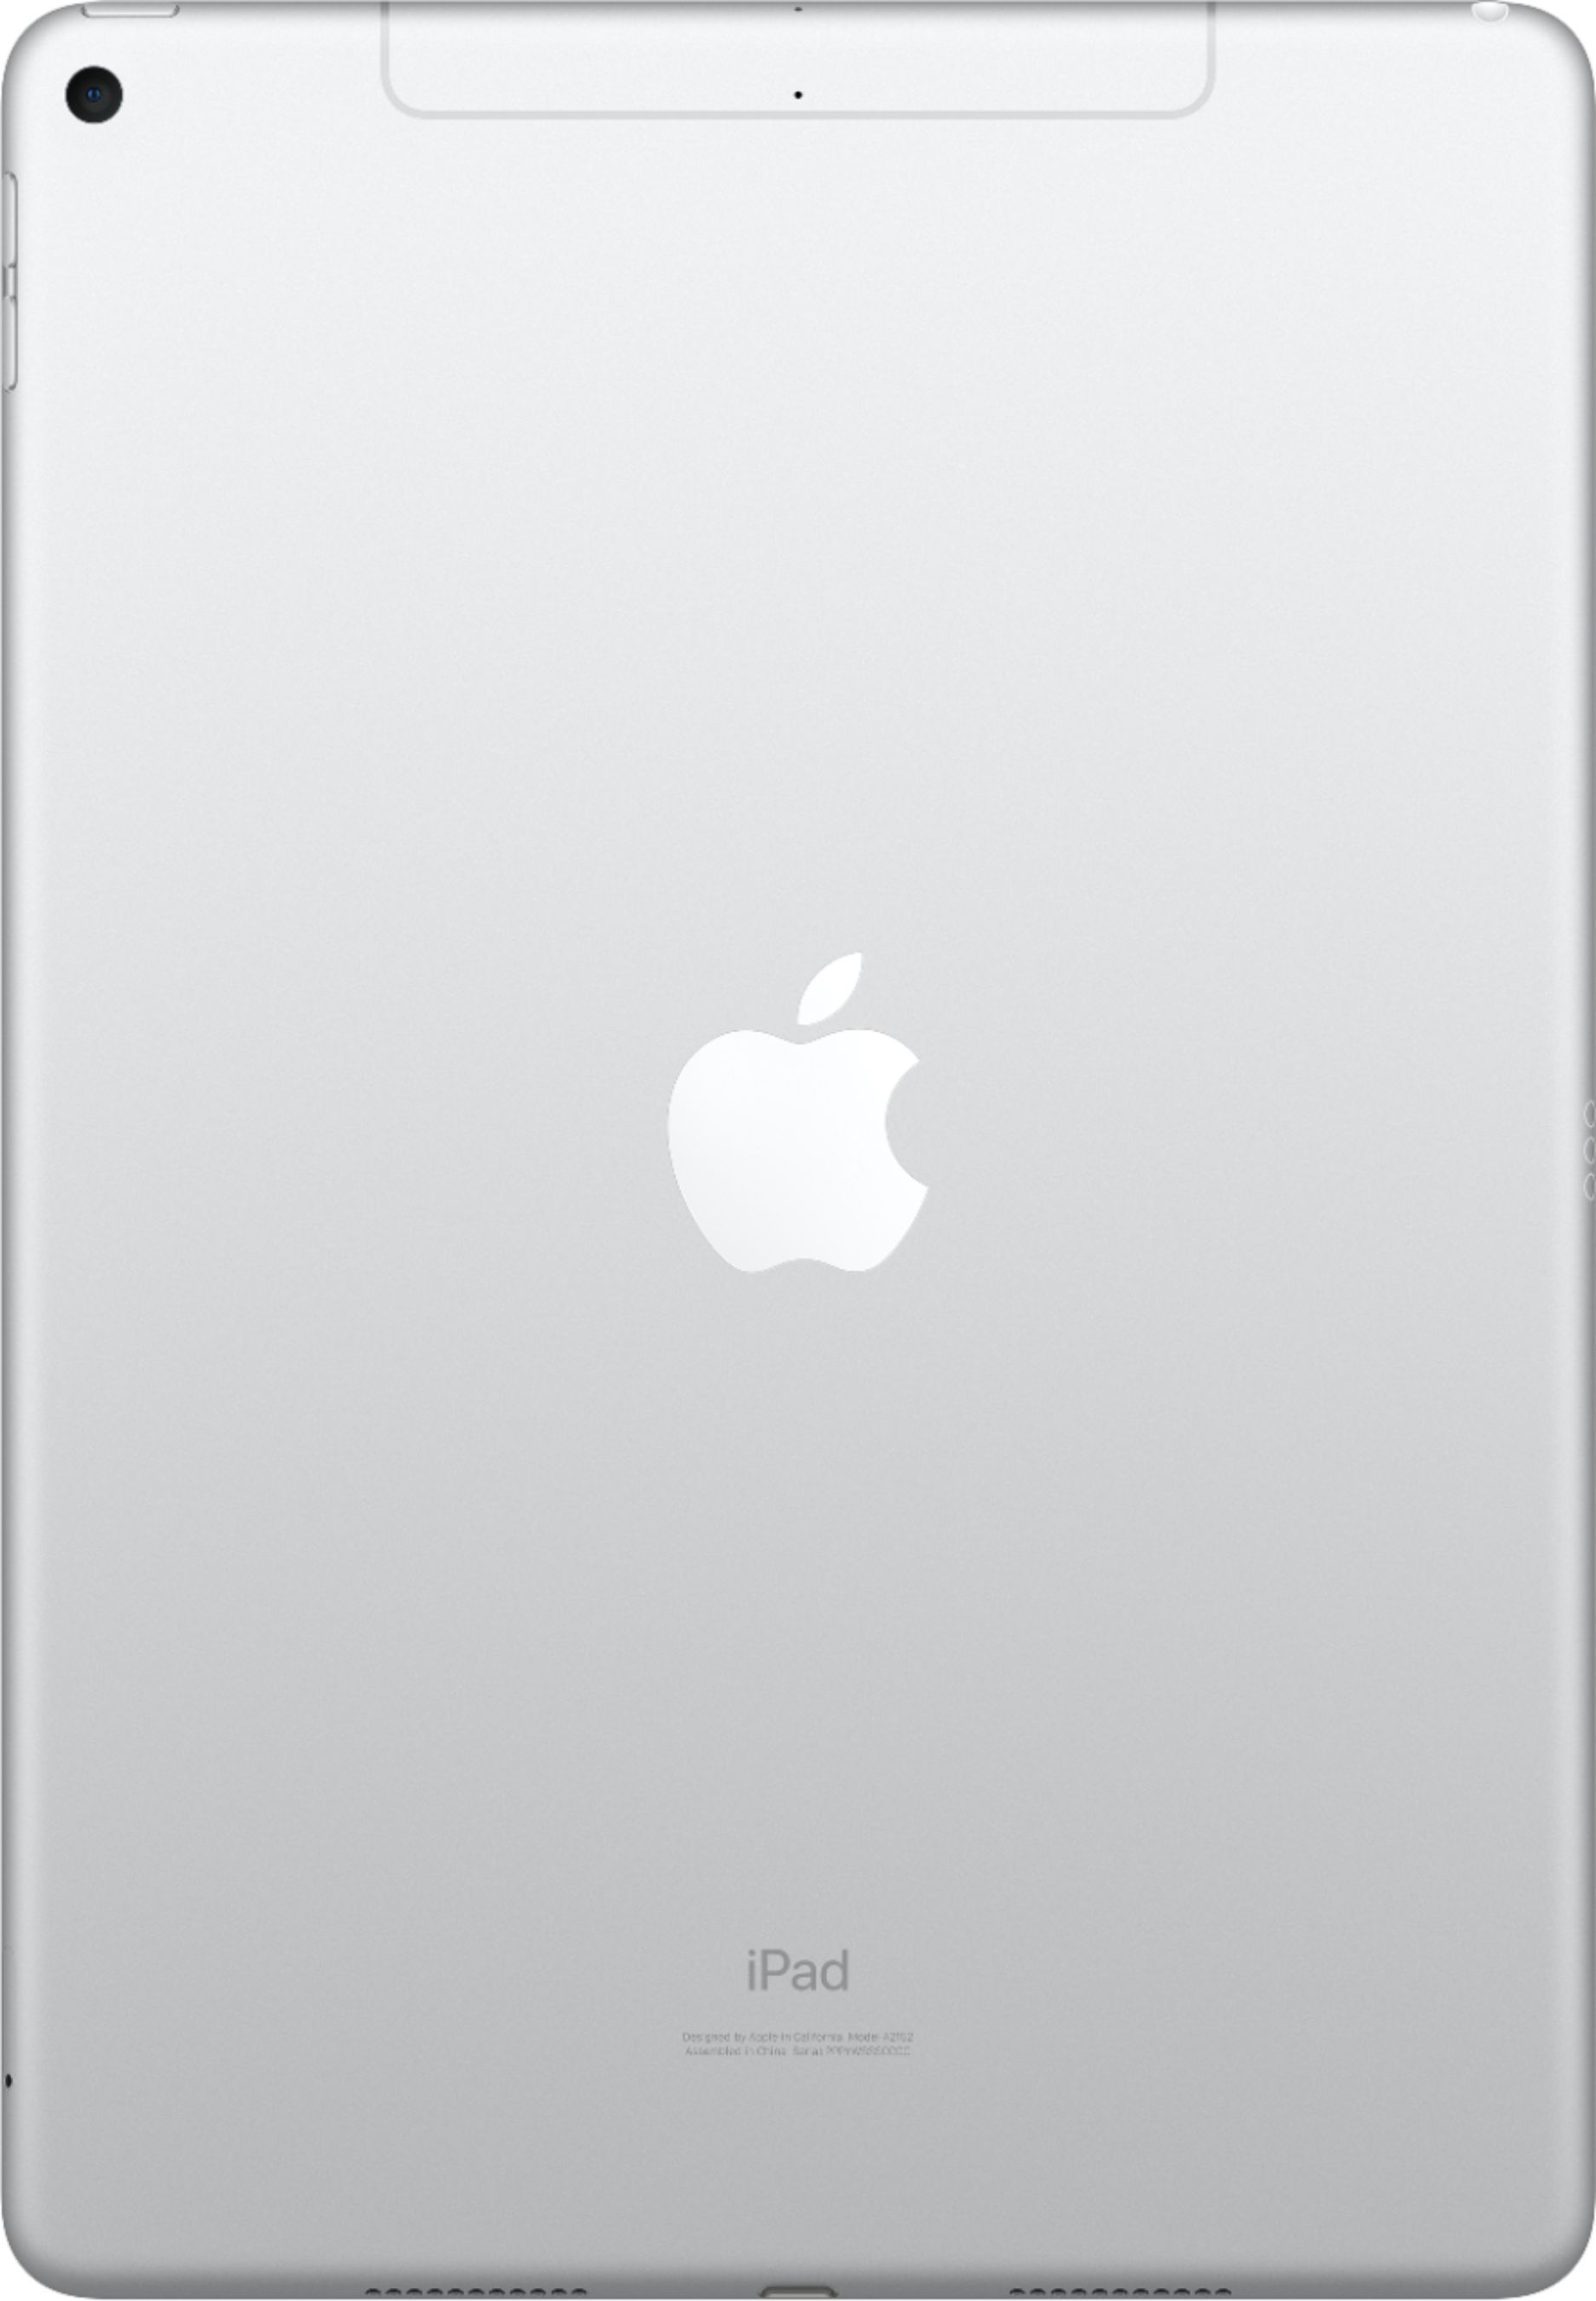 Back View: Apple - 12.9-Inch iPad Pro (4th Generation) with Wi-Fi - 512GB - Space Gray